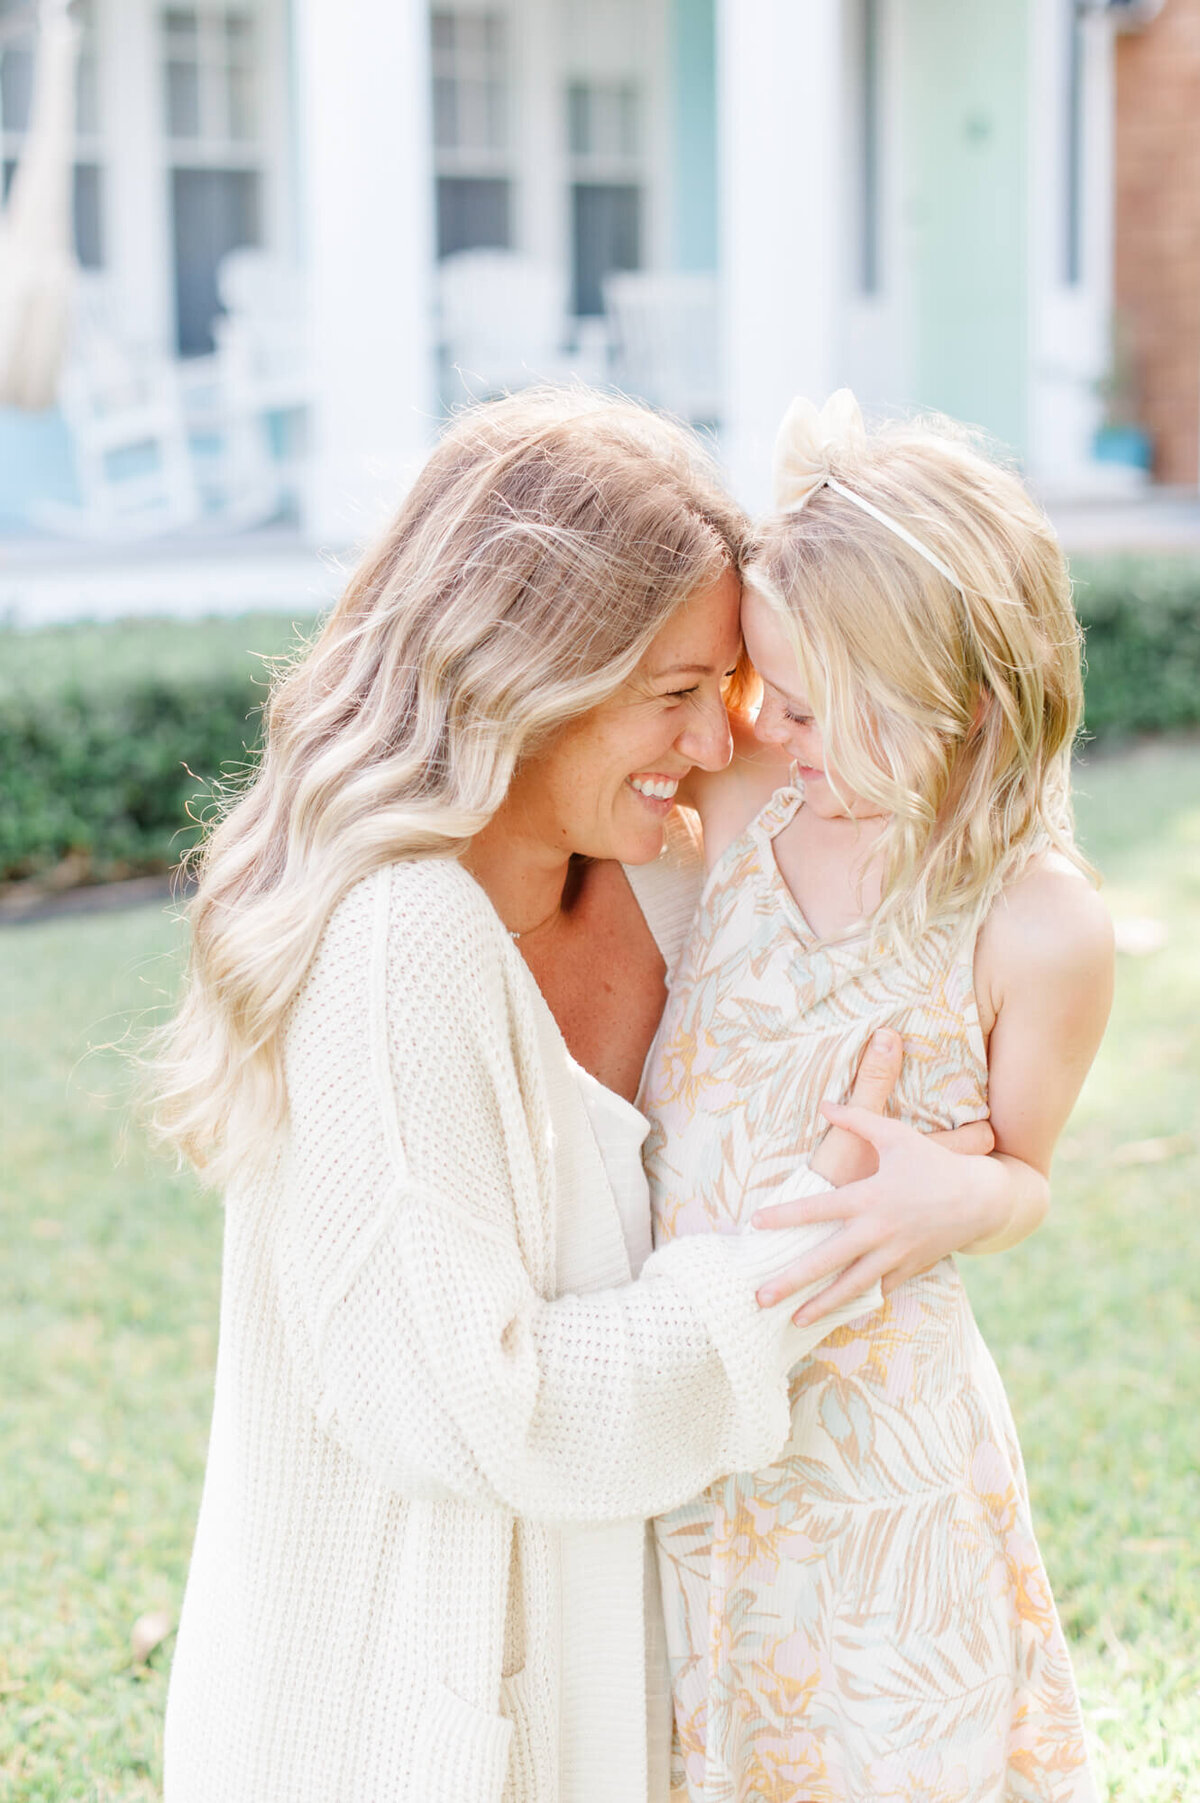 Mom holds daughter in a tight embrace